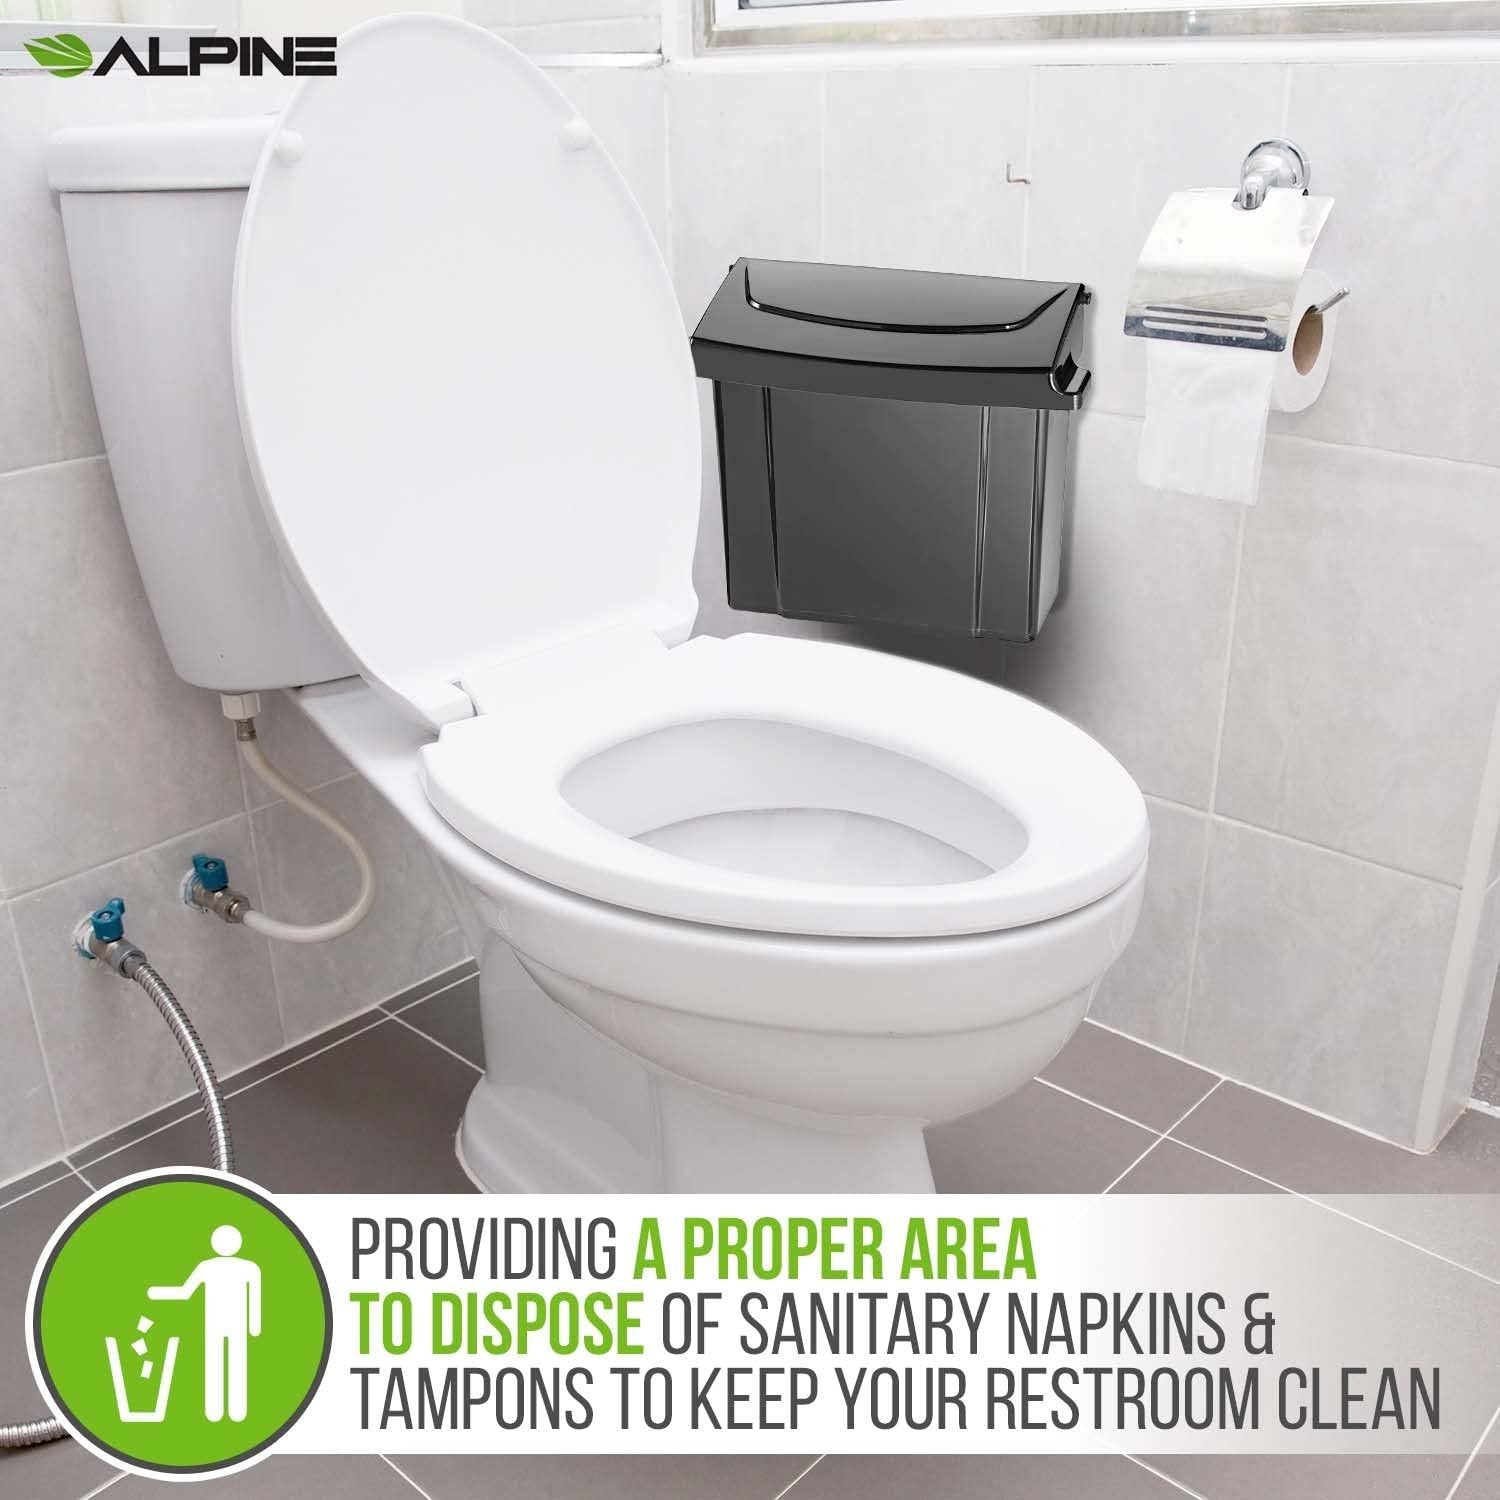 Alpine Industries Sanitary Napkin Receptacle - 5x9x12 in, Black, Durable ABS Plastic, Free Shipping